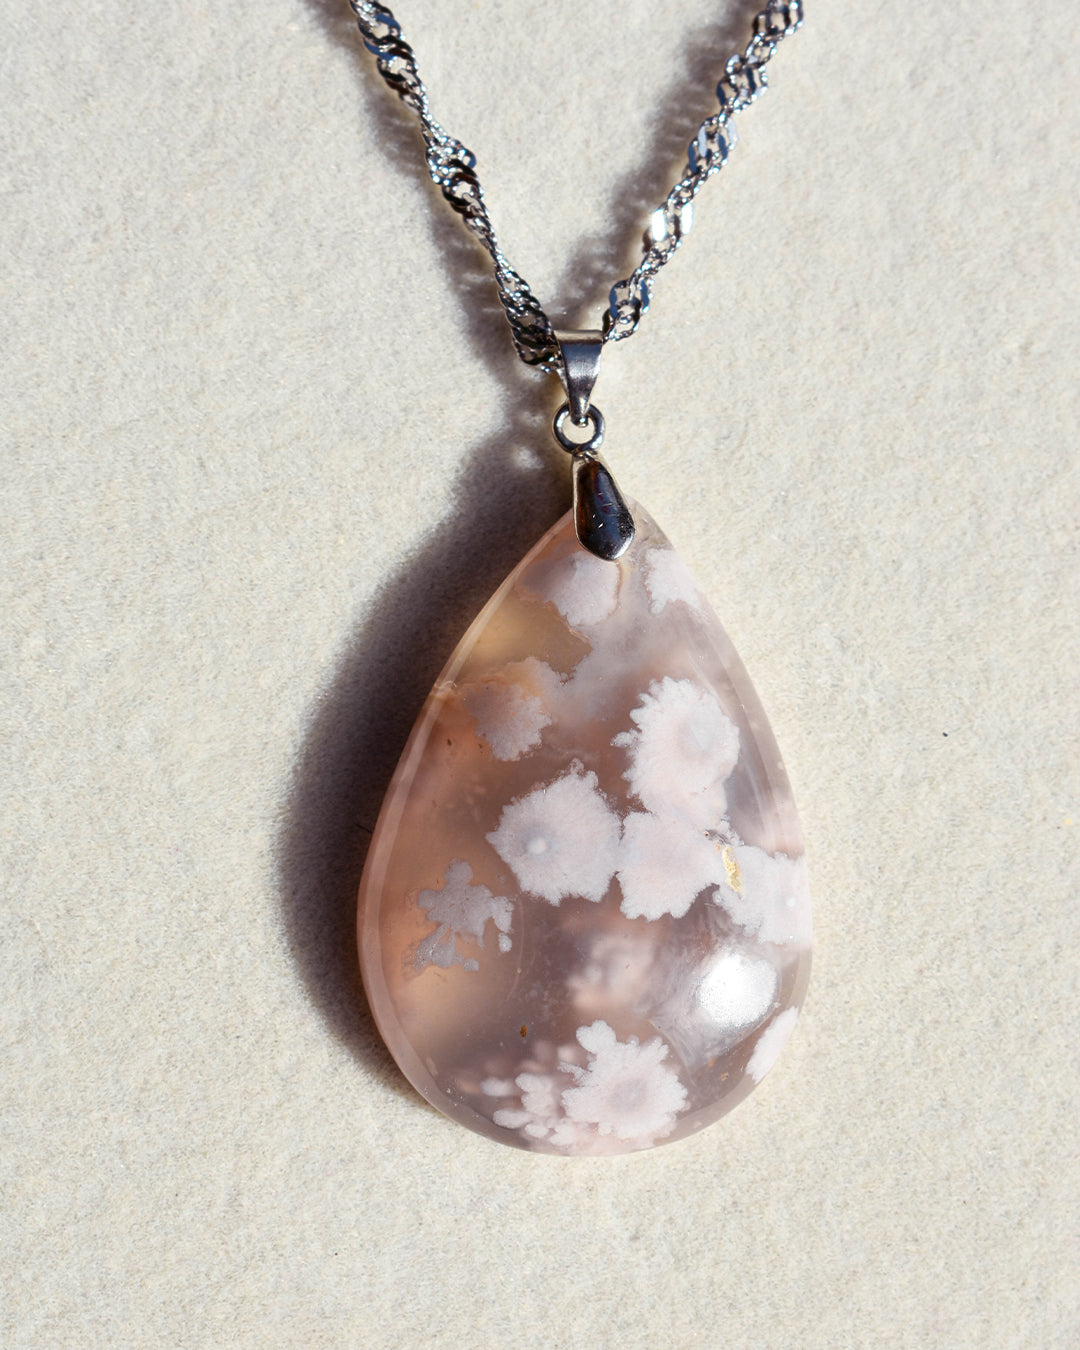 Stainless Steel chain with Flower Agate crystal pendant